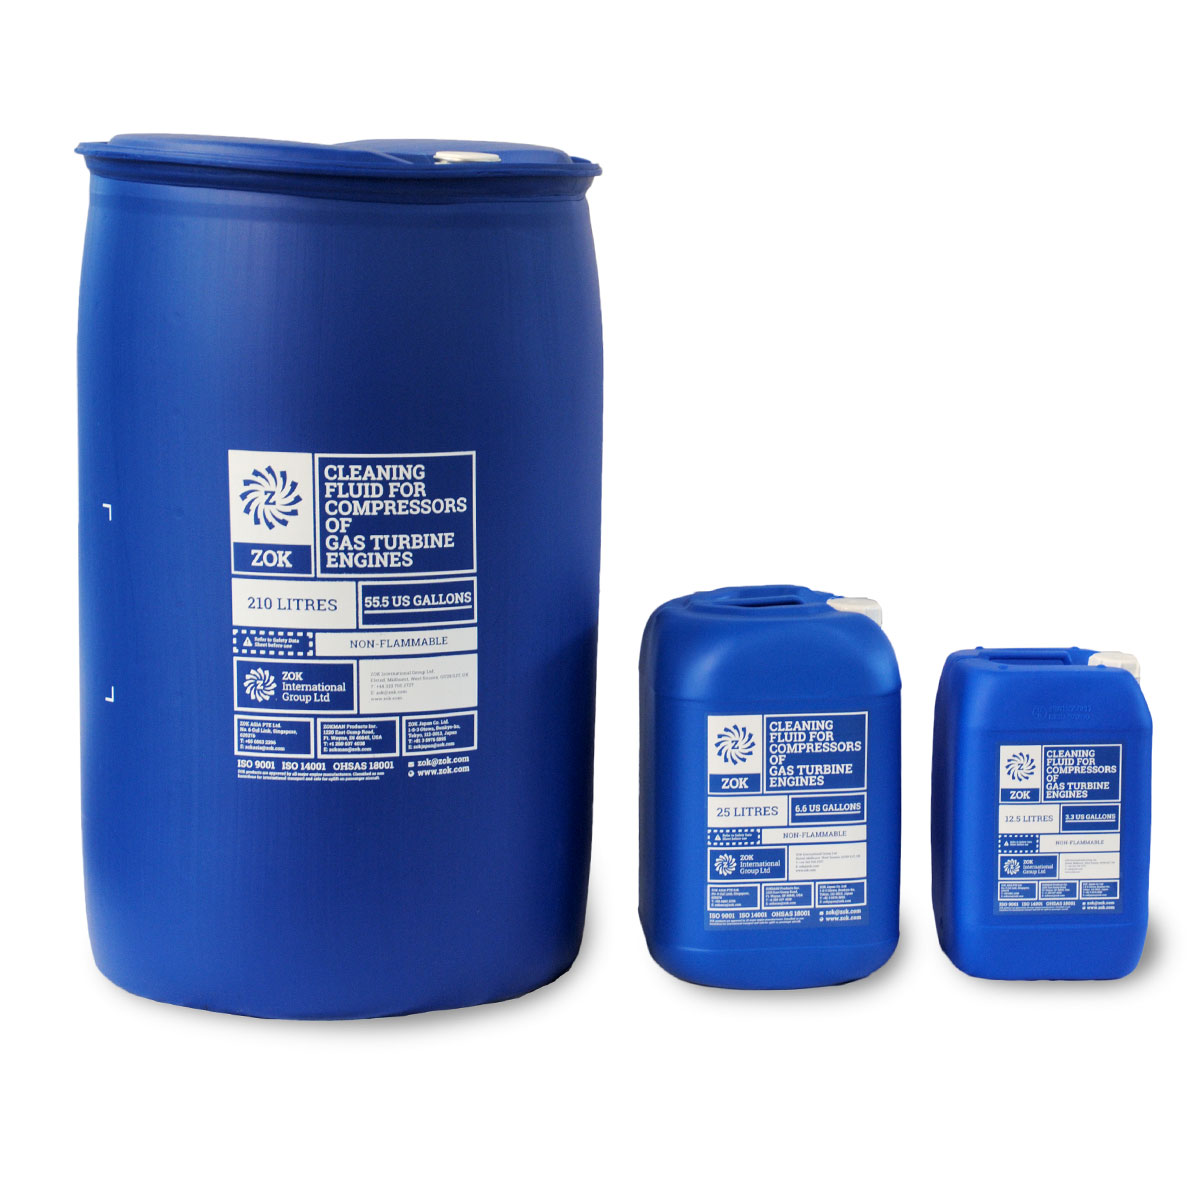 ZOK product containers